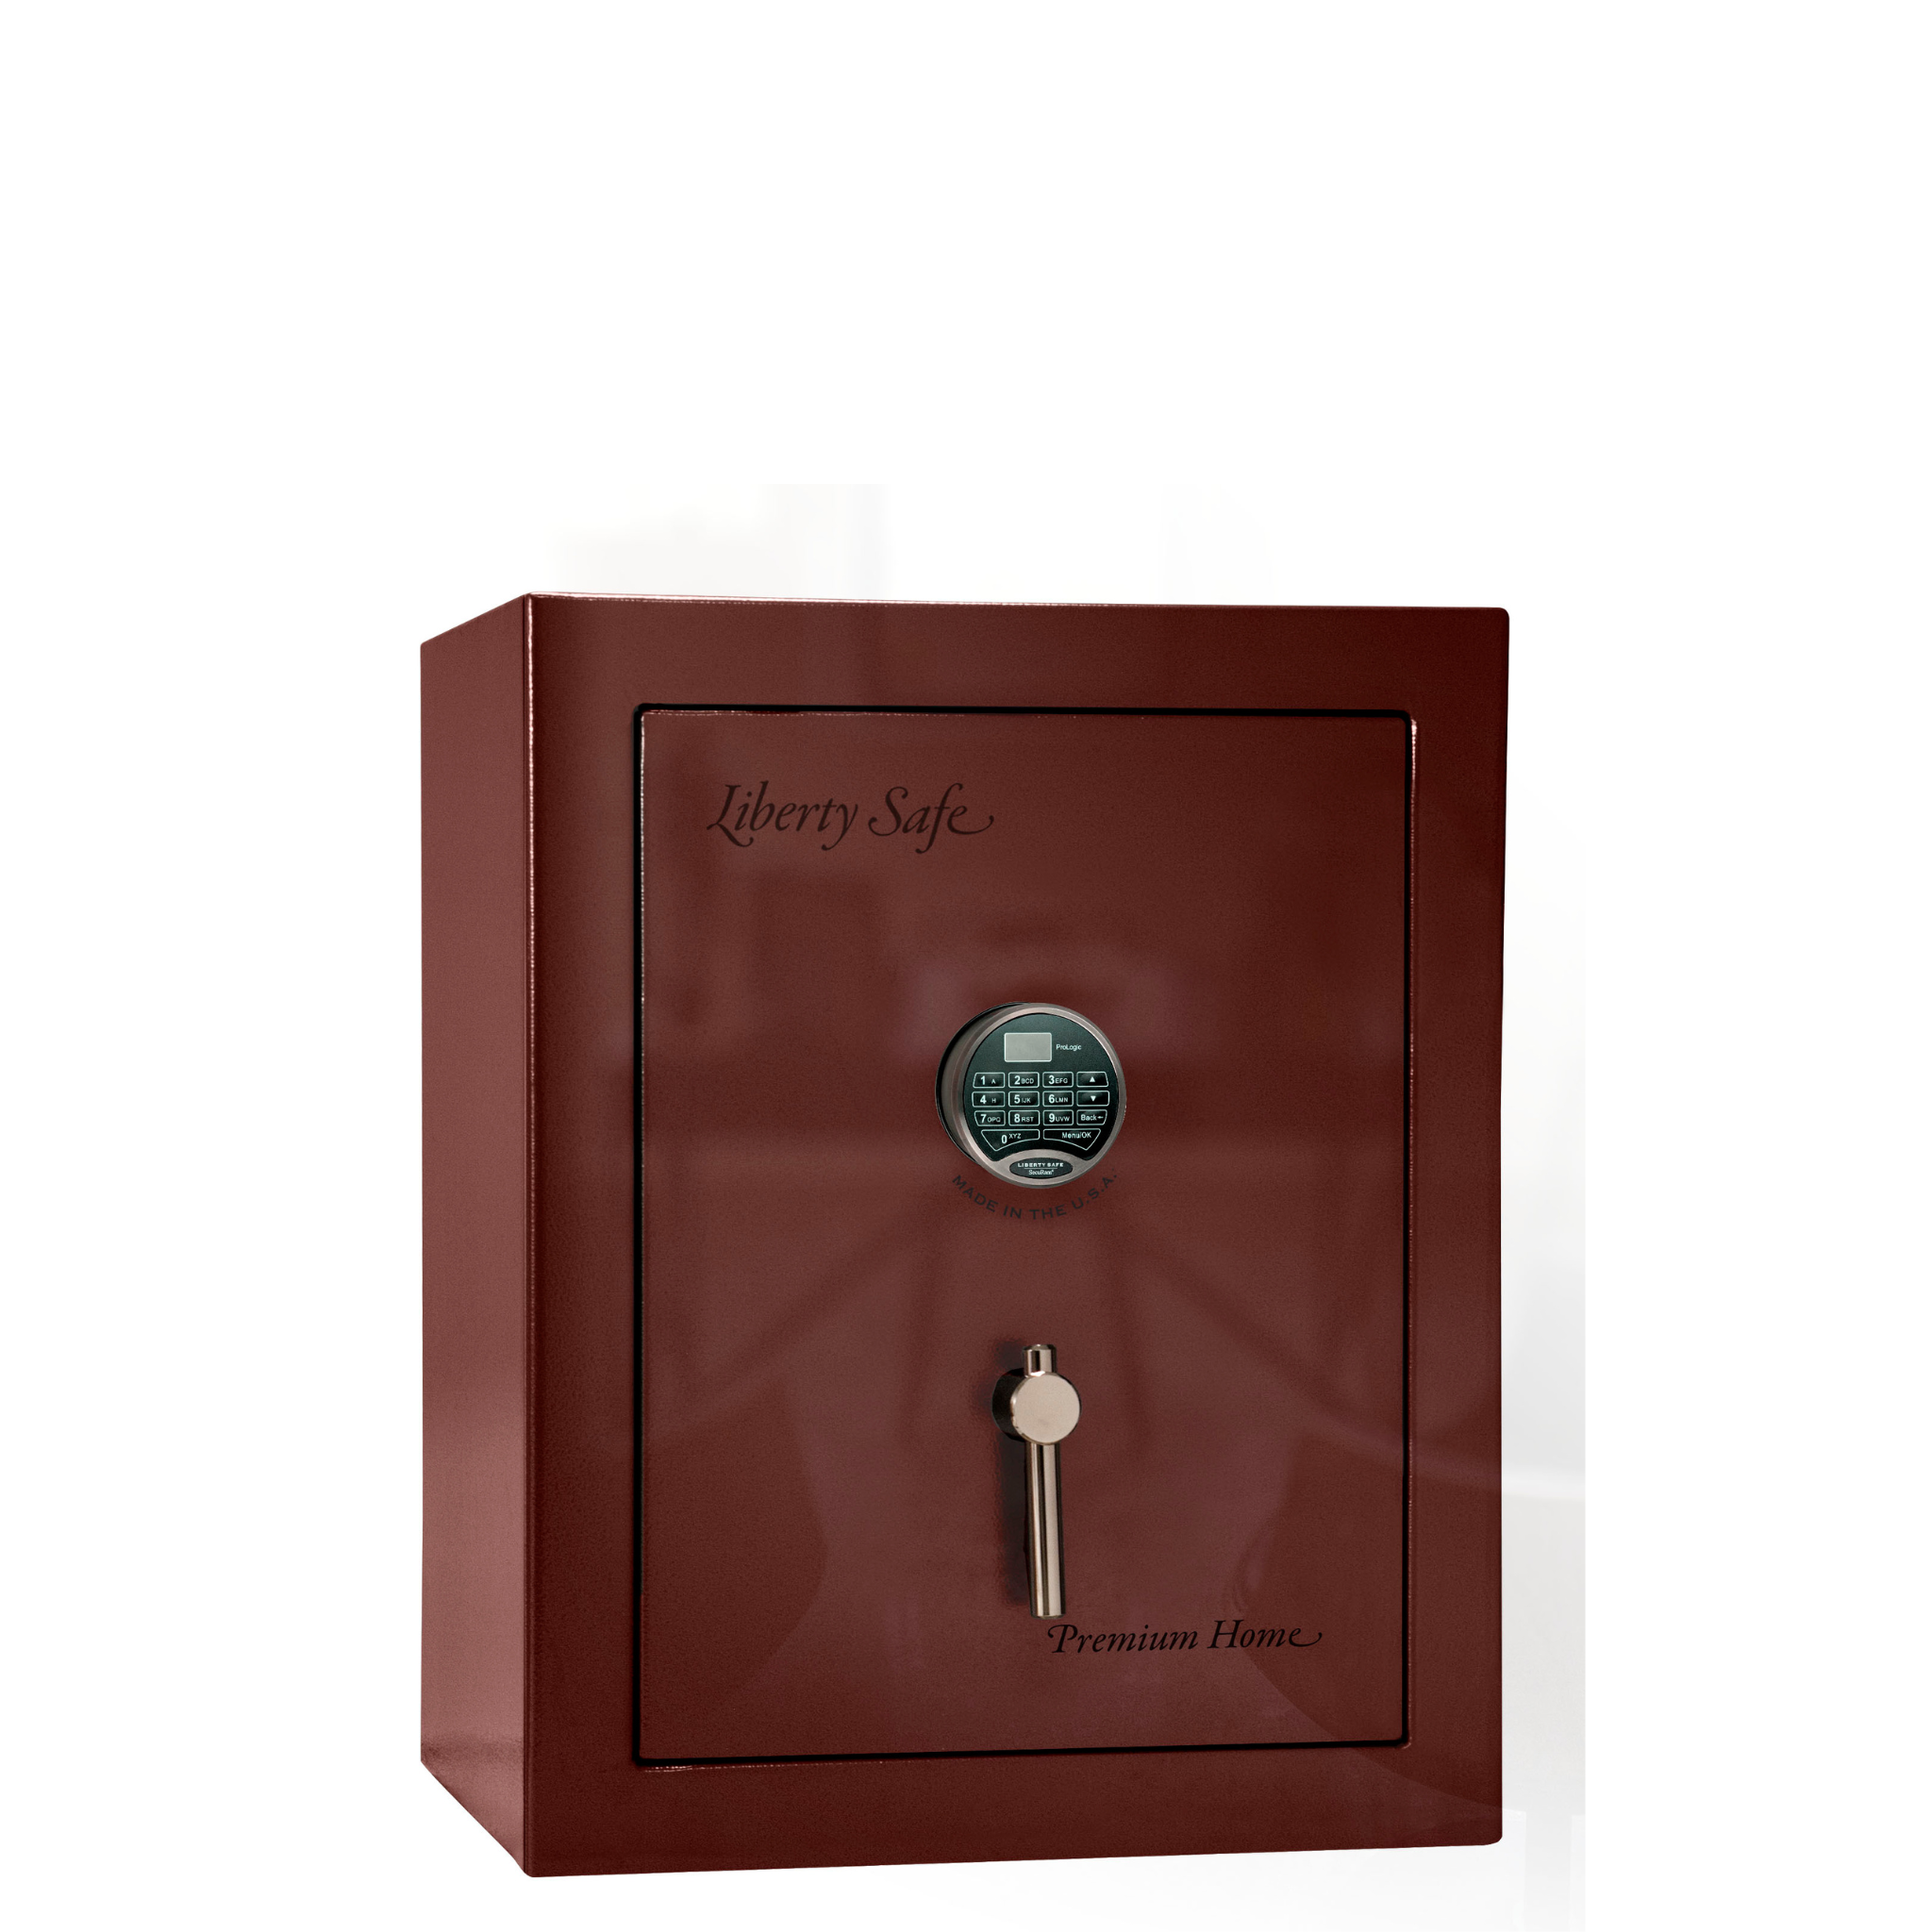 Premium Home Series | Level 7 Security | 2 Hour Fire Protection | 08 | Dimensions: 29.75"(H) x 24.5"(W) x 19"(D) | Burgundy Gloss Black Chrome - Closed Door